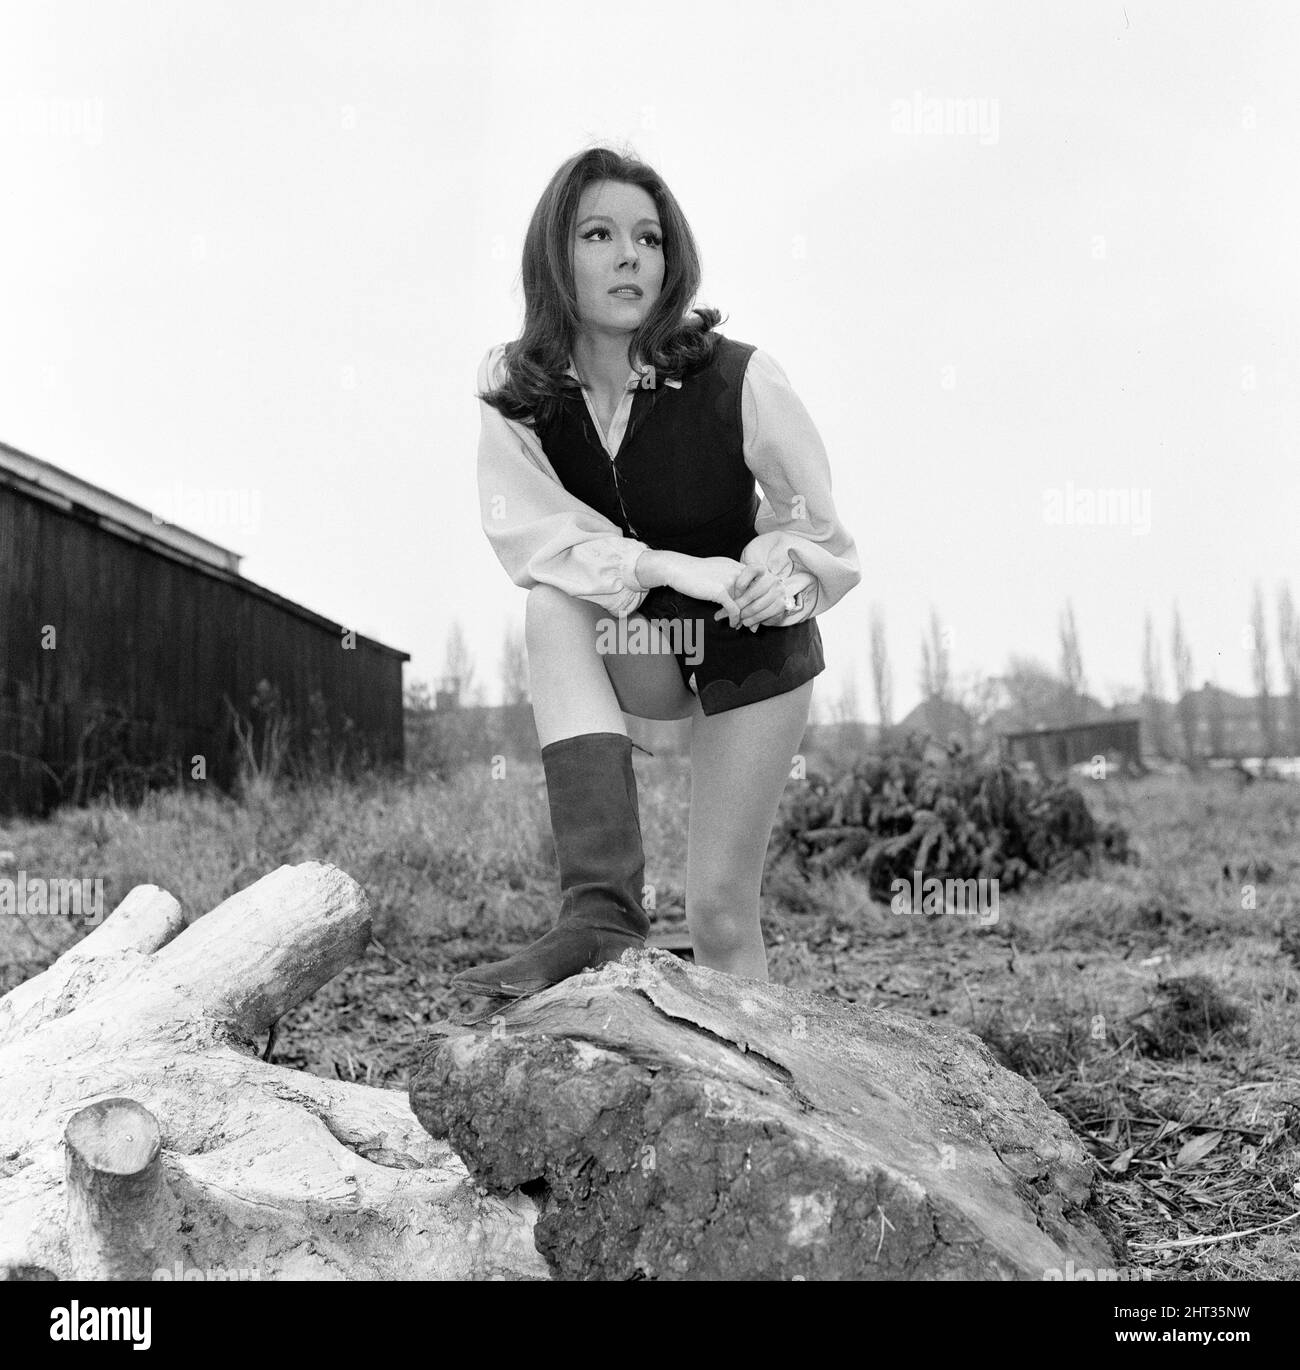 Diana Rigg, Actress a.k.a. Emma Peel, dressed as Robin Hood for an episode of The Avengers ABC TV Series, titled 'A Sense of History', Photo-call on set, 15th February 1966. Stock Photo